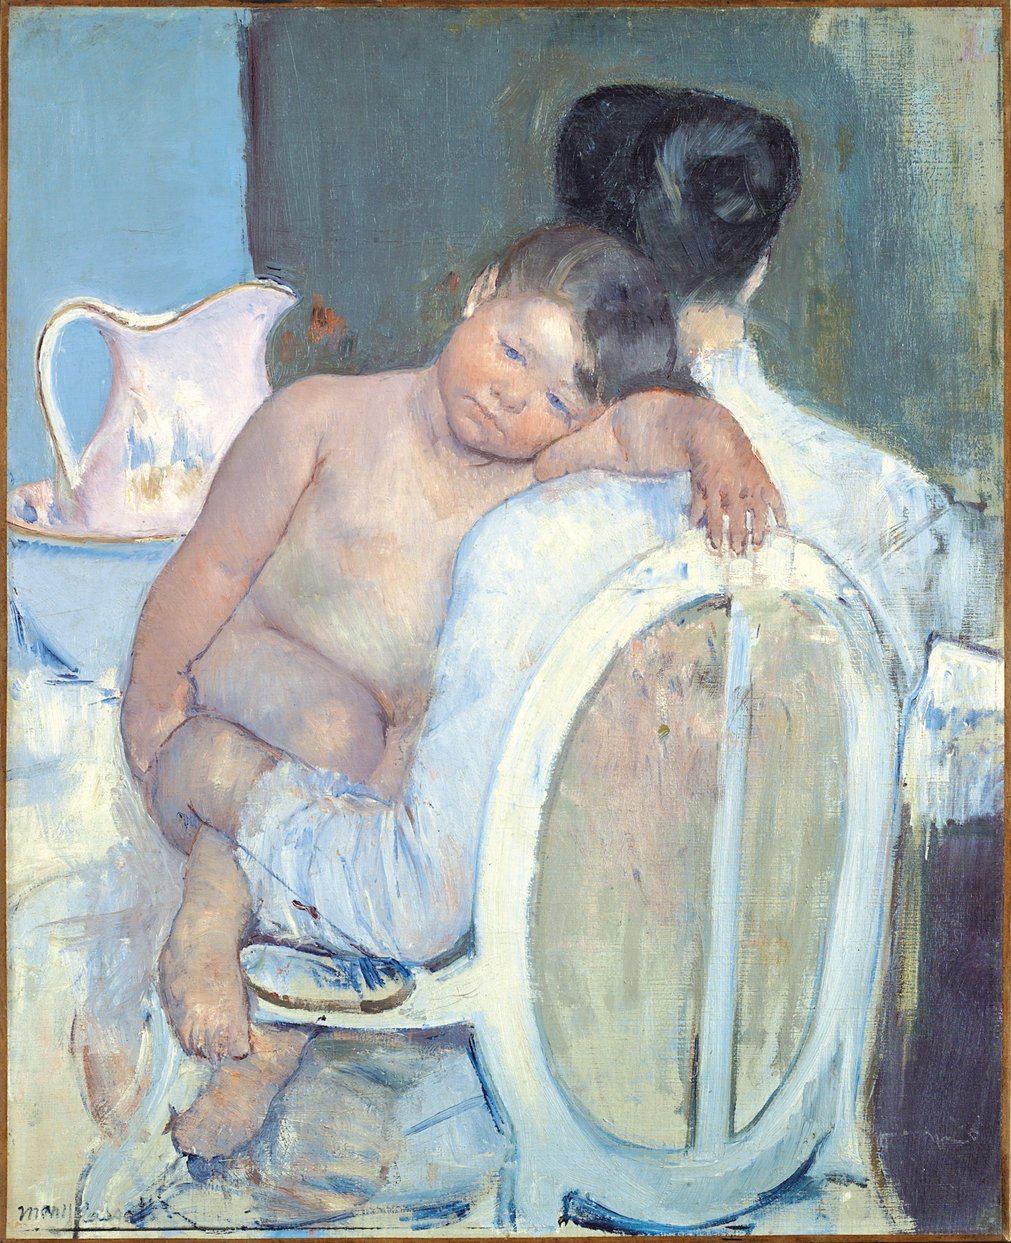 https://upload.wikimedia.org/wikipedia/commons/f/fd/Mary_Cassatt_-_Woman_Sitting_with_a_Child_in_Her_Arms_-_Google_Art_Project.jpg